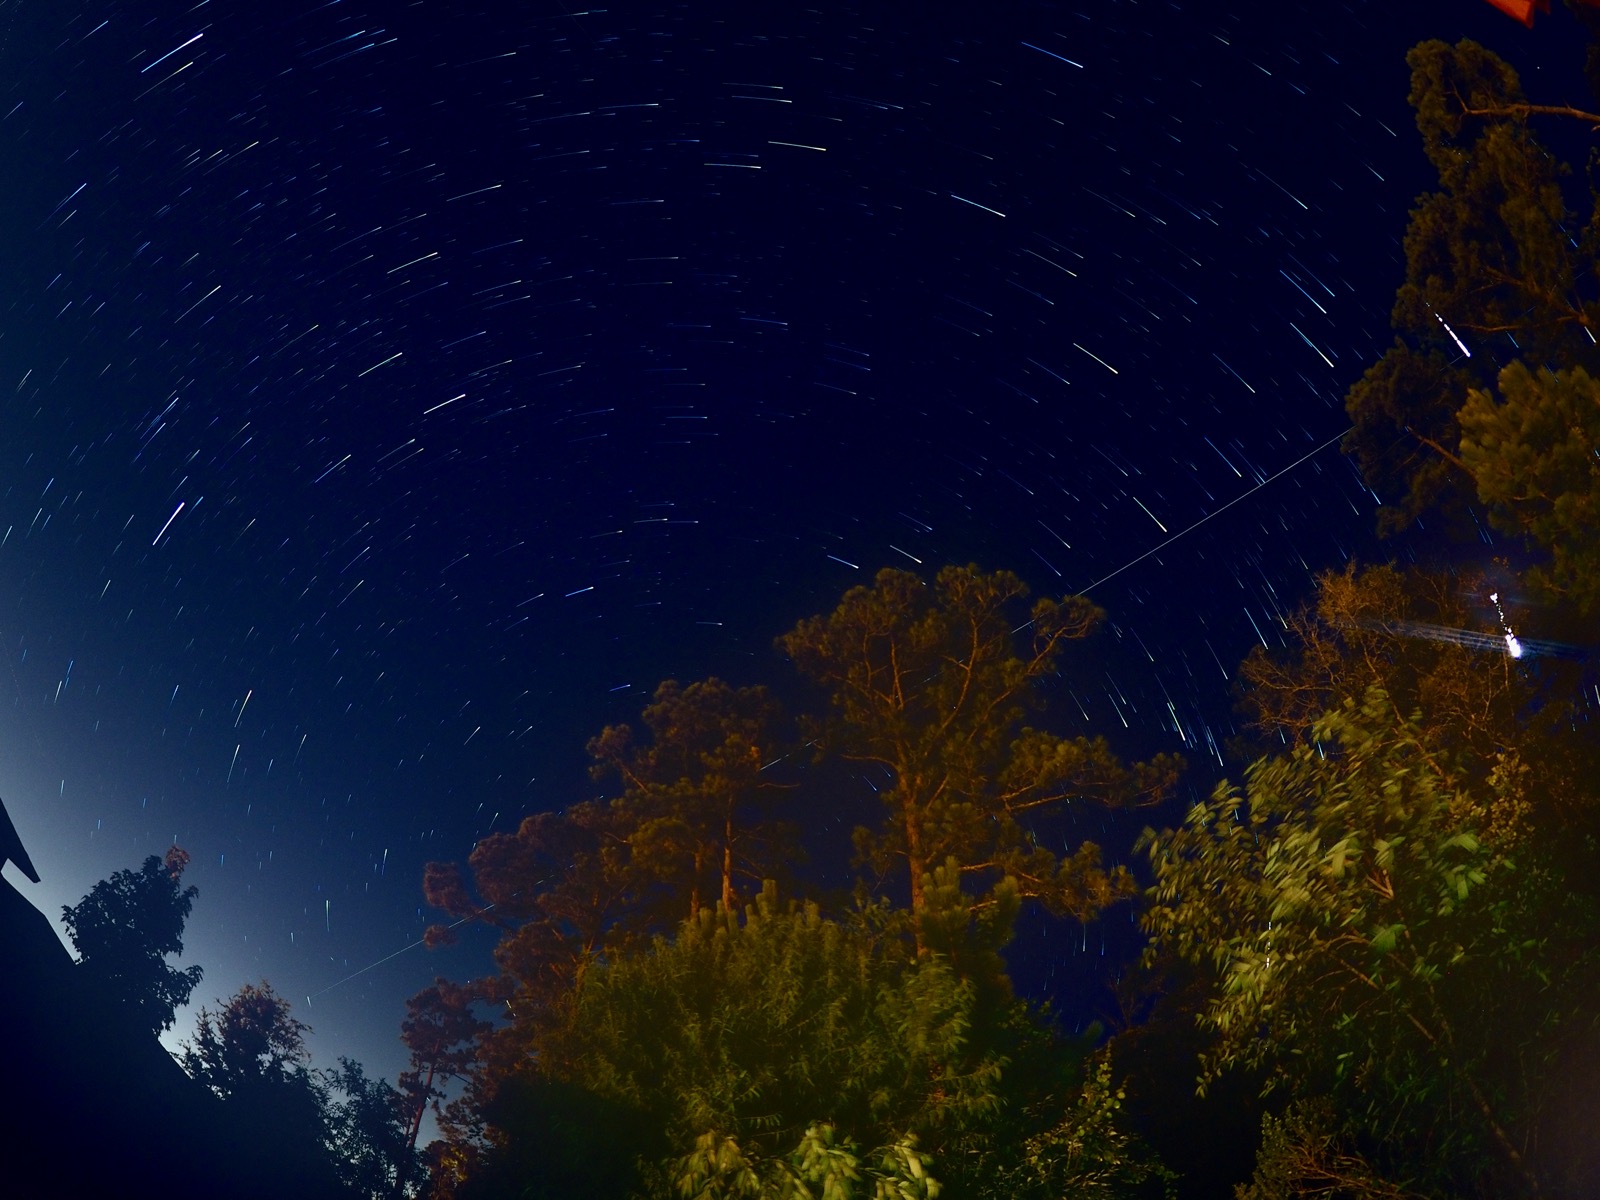 Light trail of the International Space Station over Nocatee amid star trails and a trees in the bottom right half of the frame.